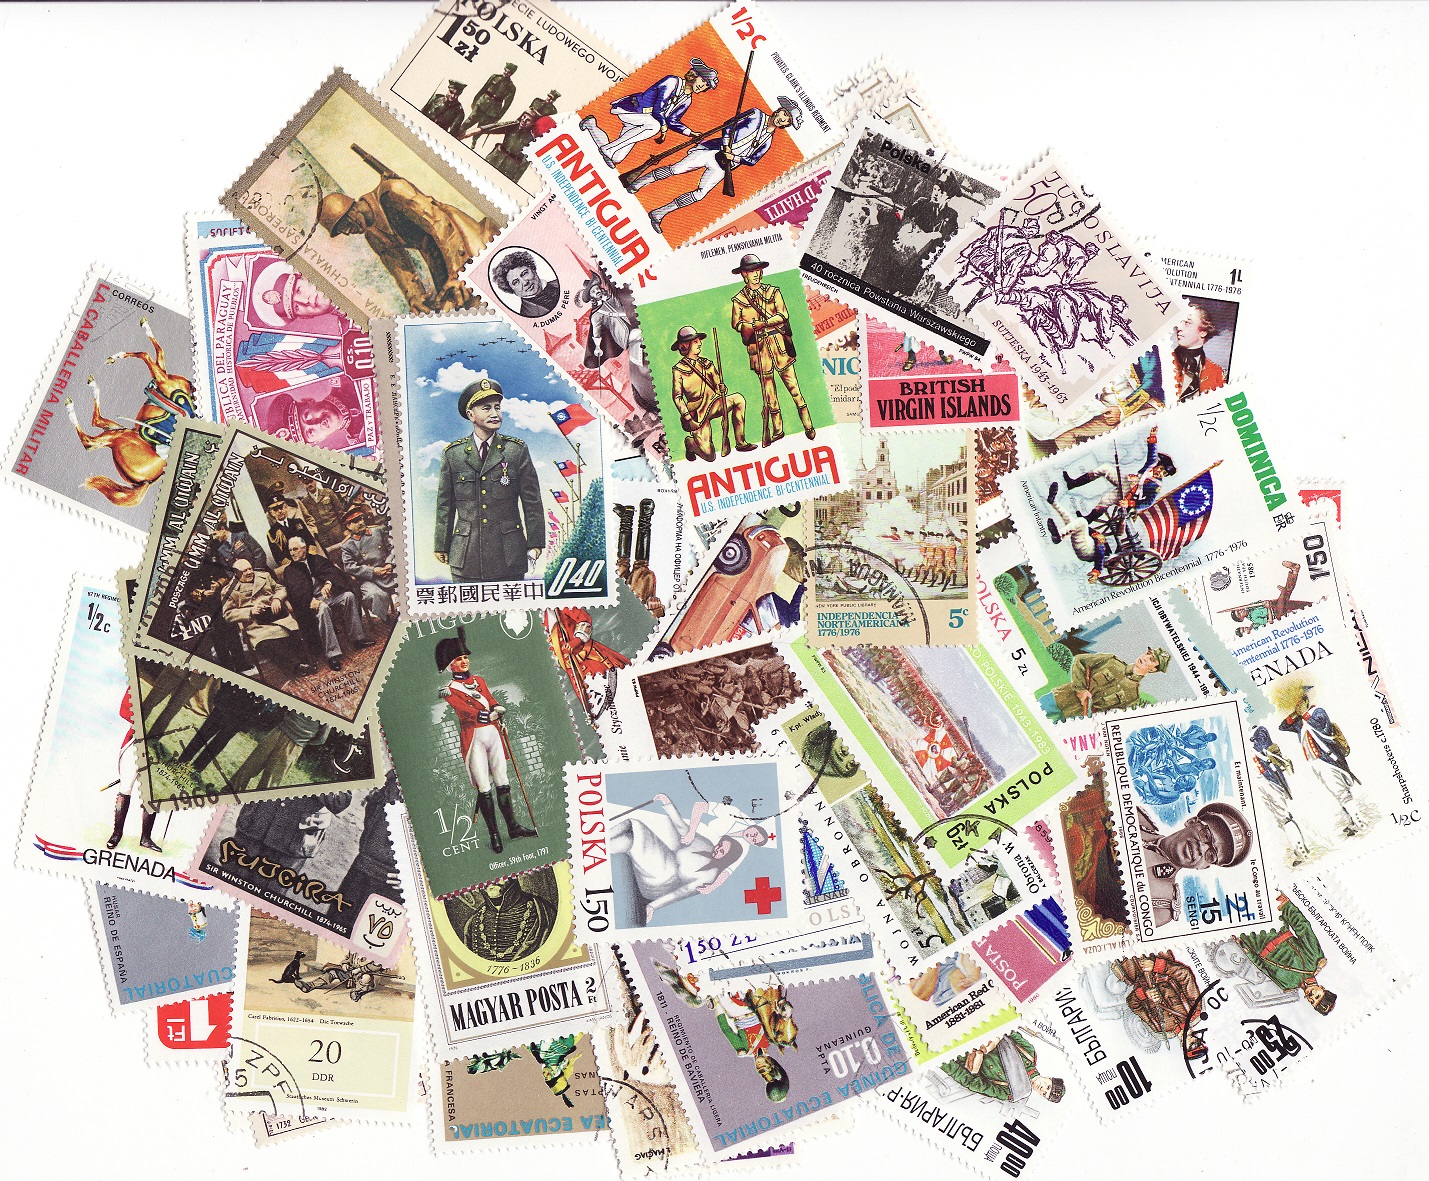 Uniforms on Stamps, Topical Stamp Packet, 100 different stamps